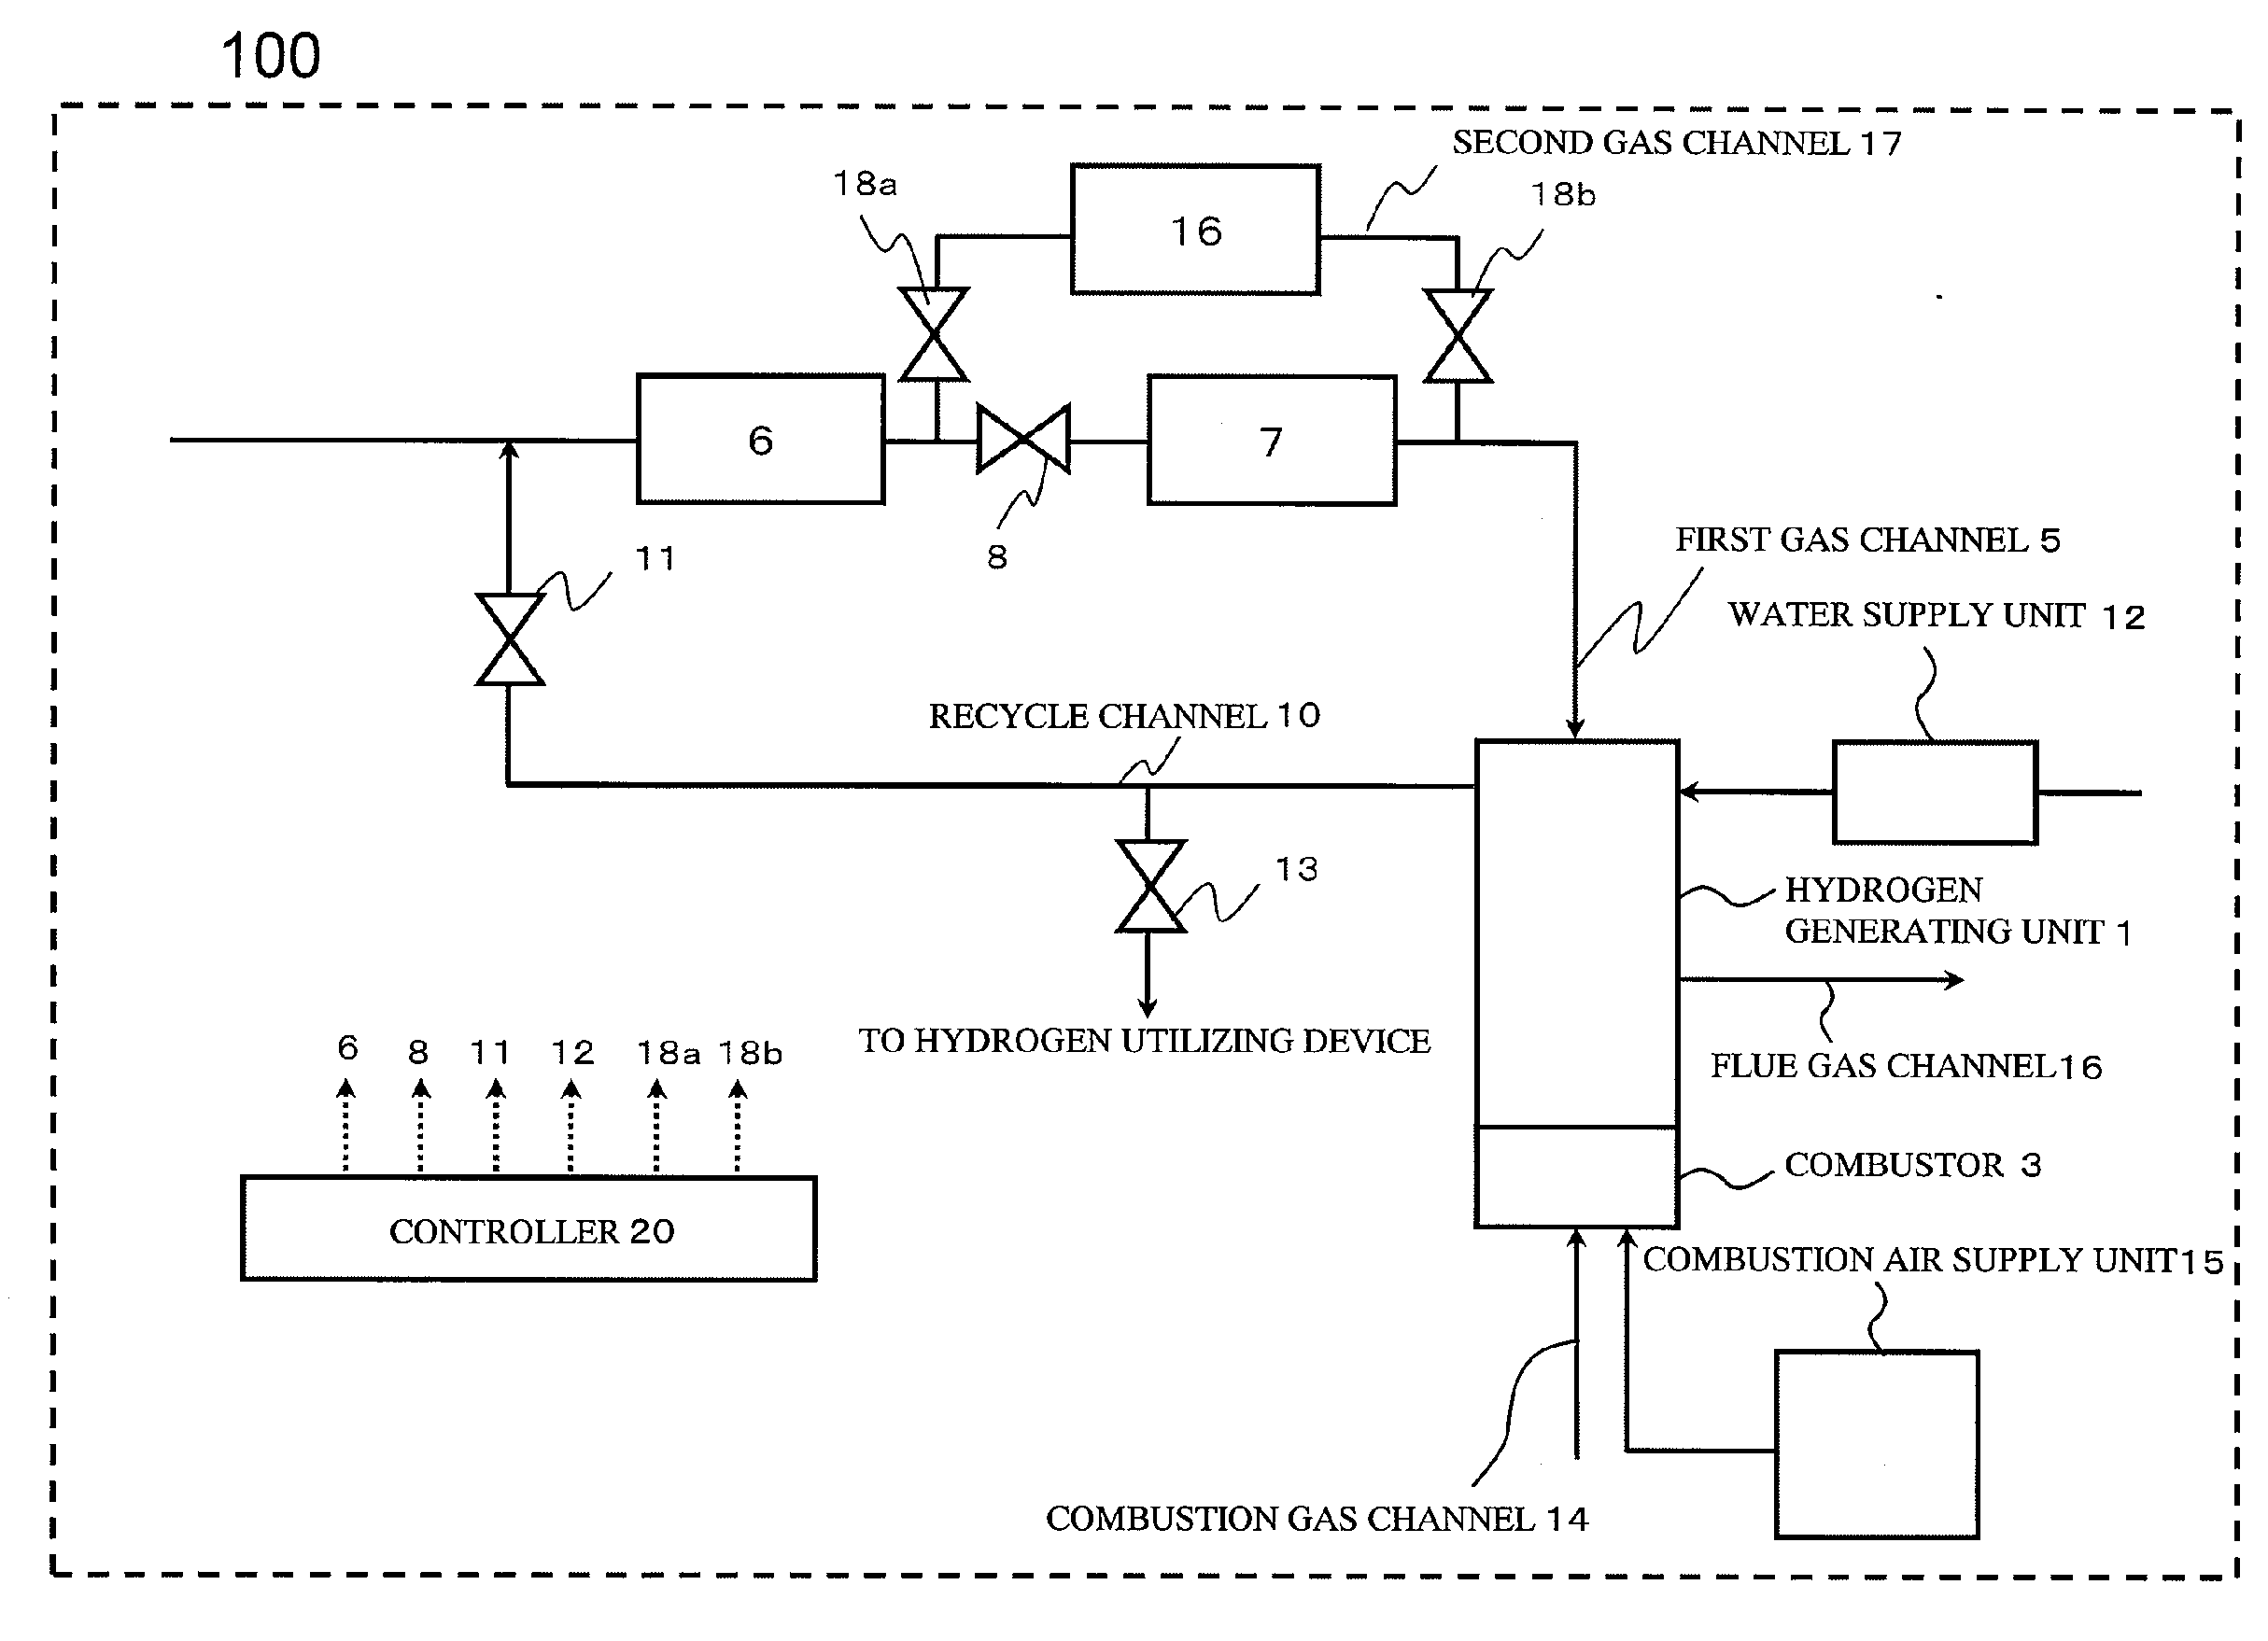 Hydrogen generator and fuel cell system